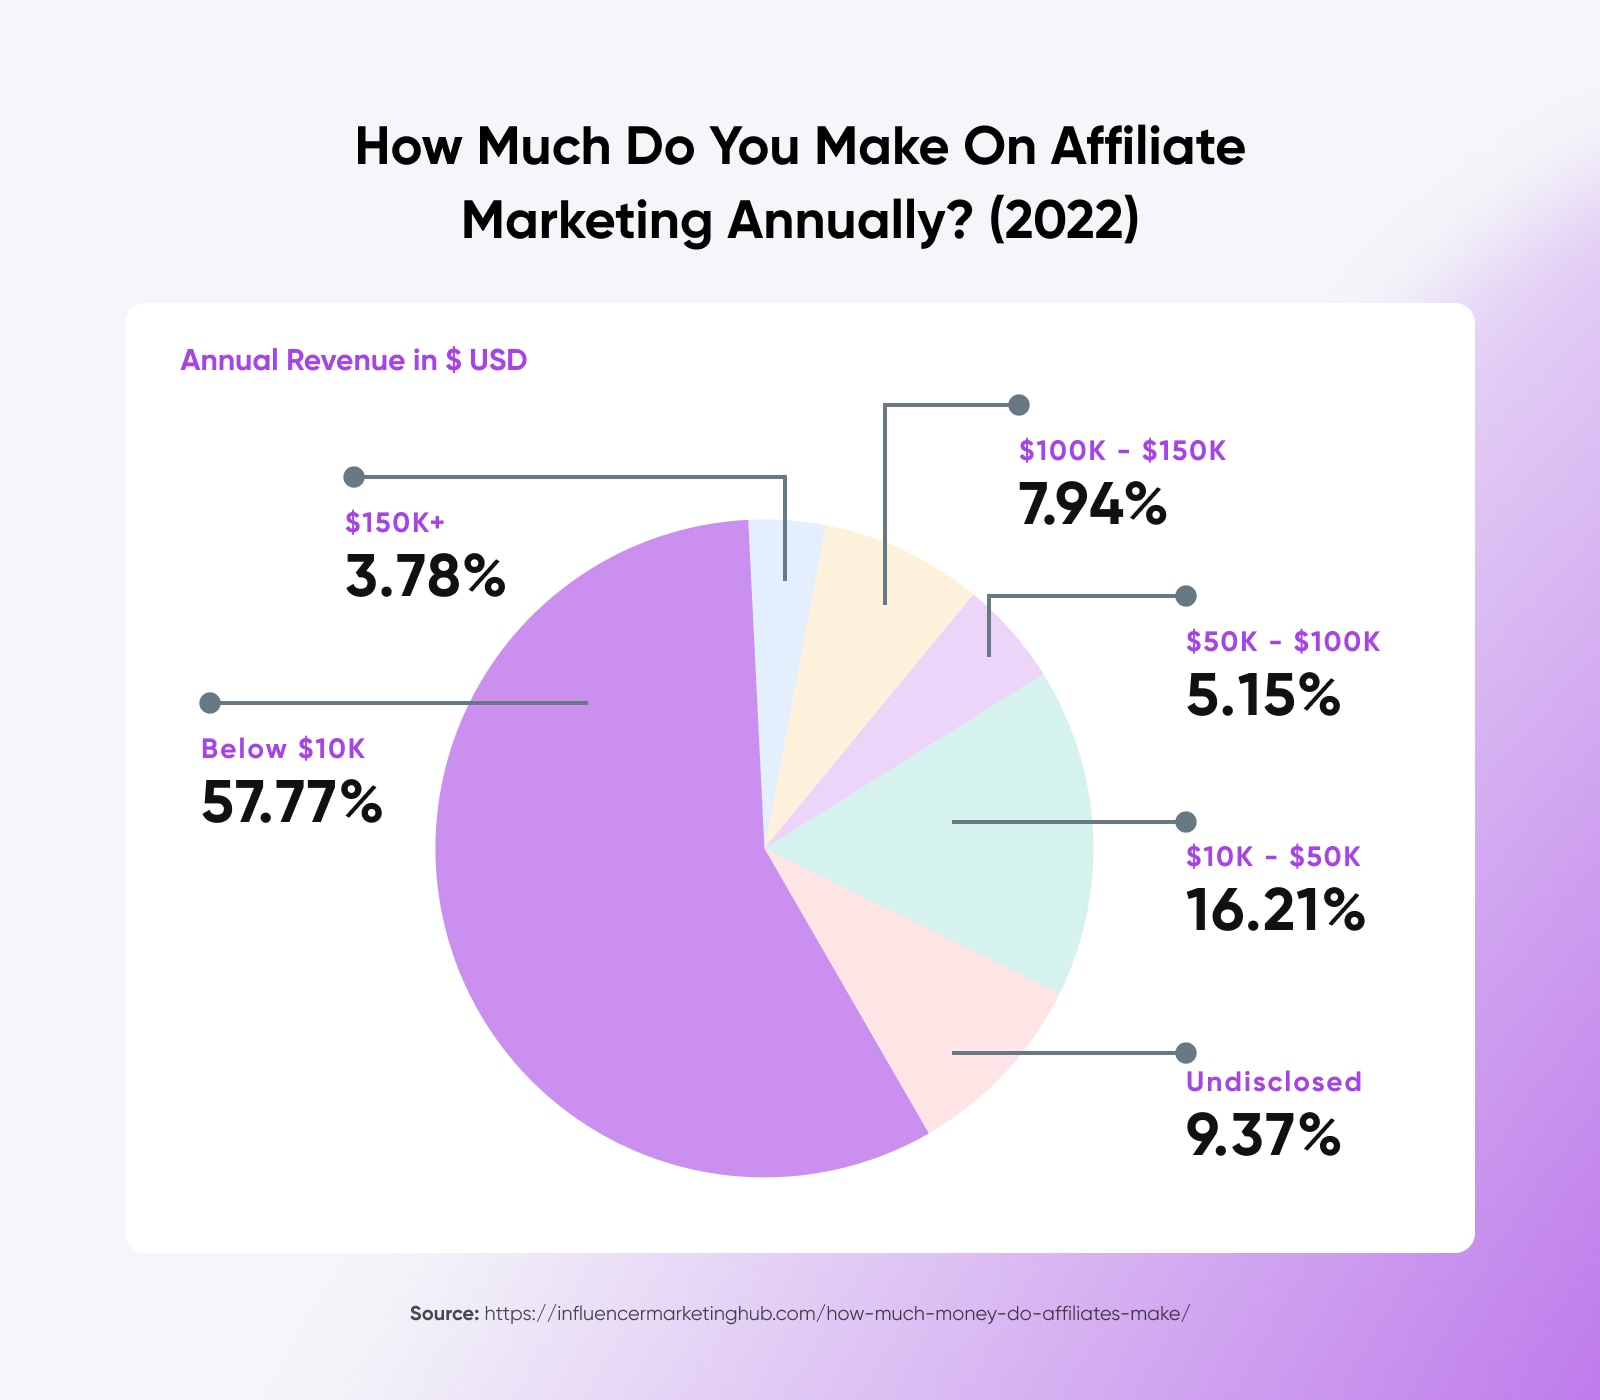 How Much Do You Make On Affiliate Marketing Annually (2022)